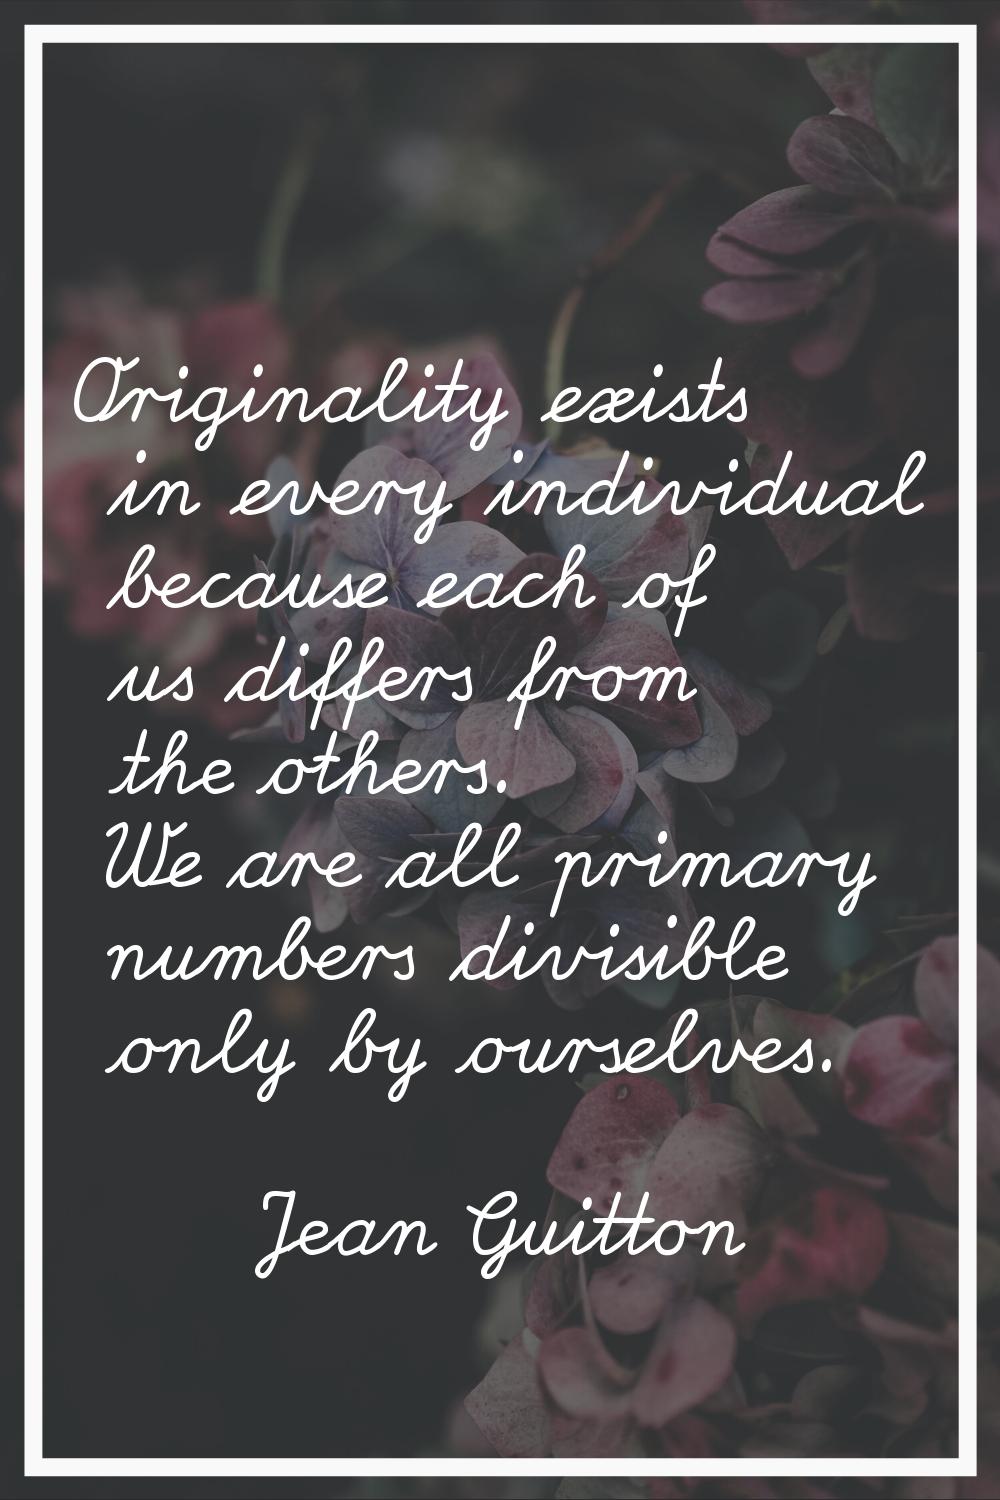 Originality exists in every individual because each of us differs from the others. We are all prima